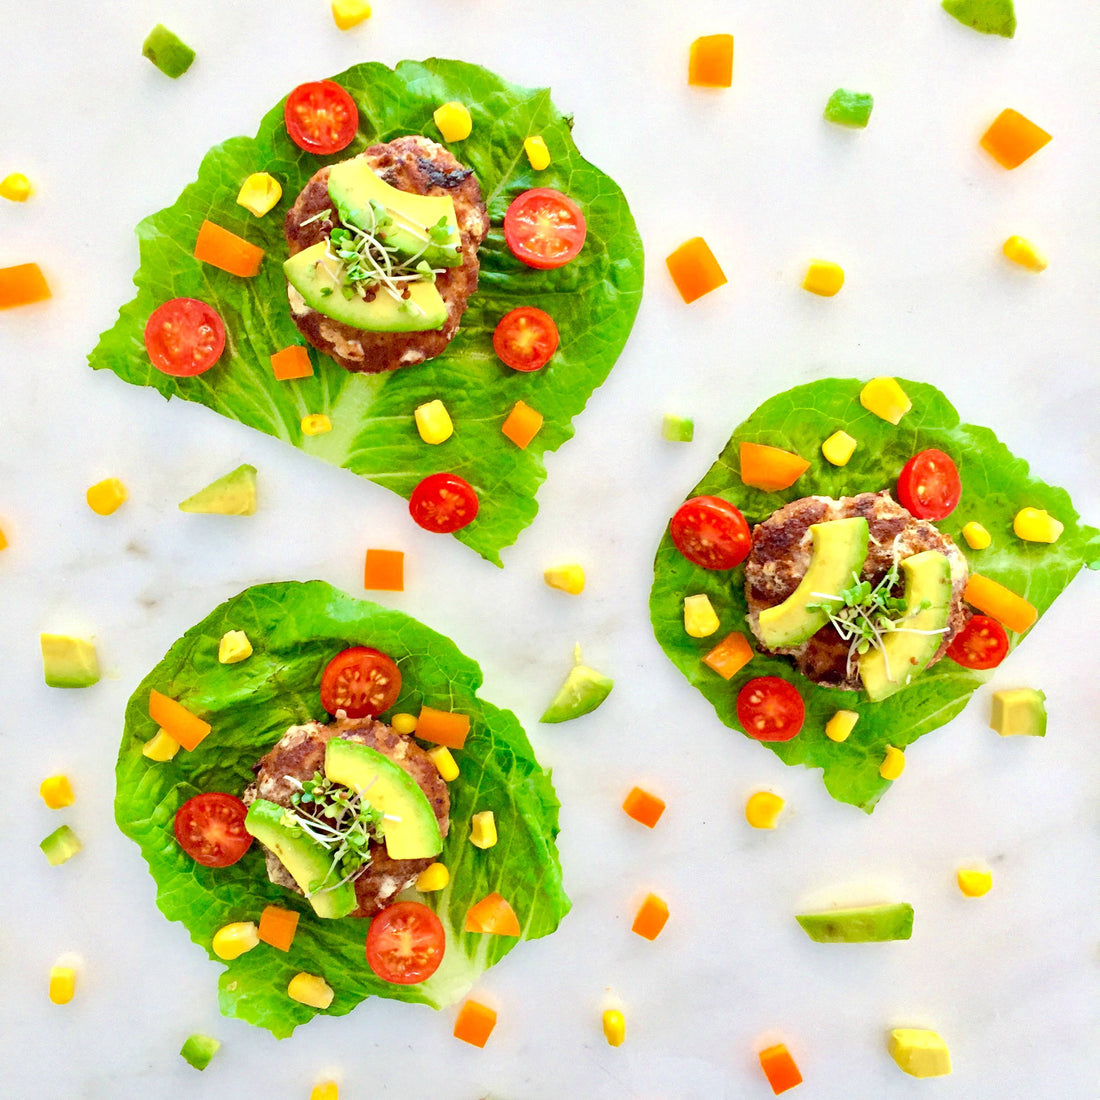 Lettuce Cups For A Quick Healthy Snack